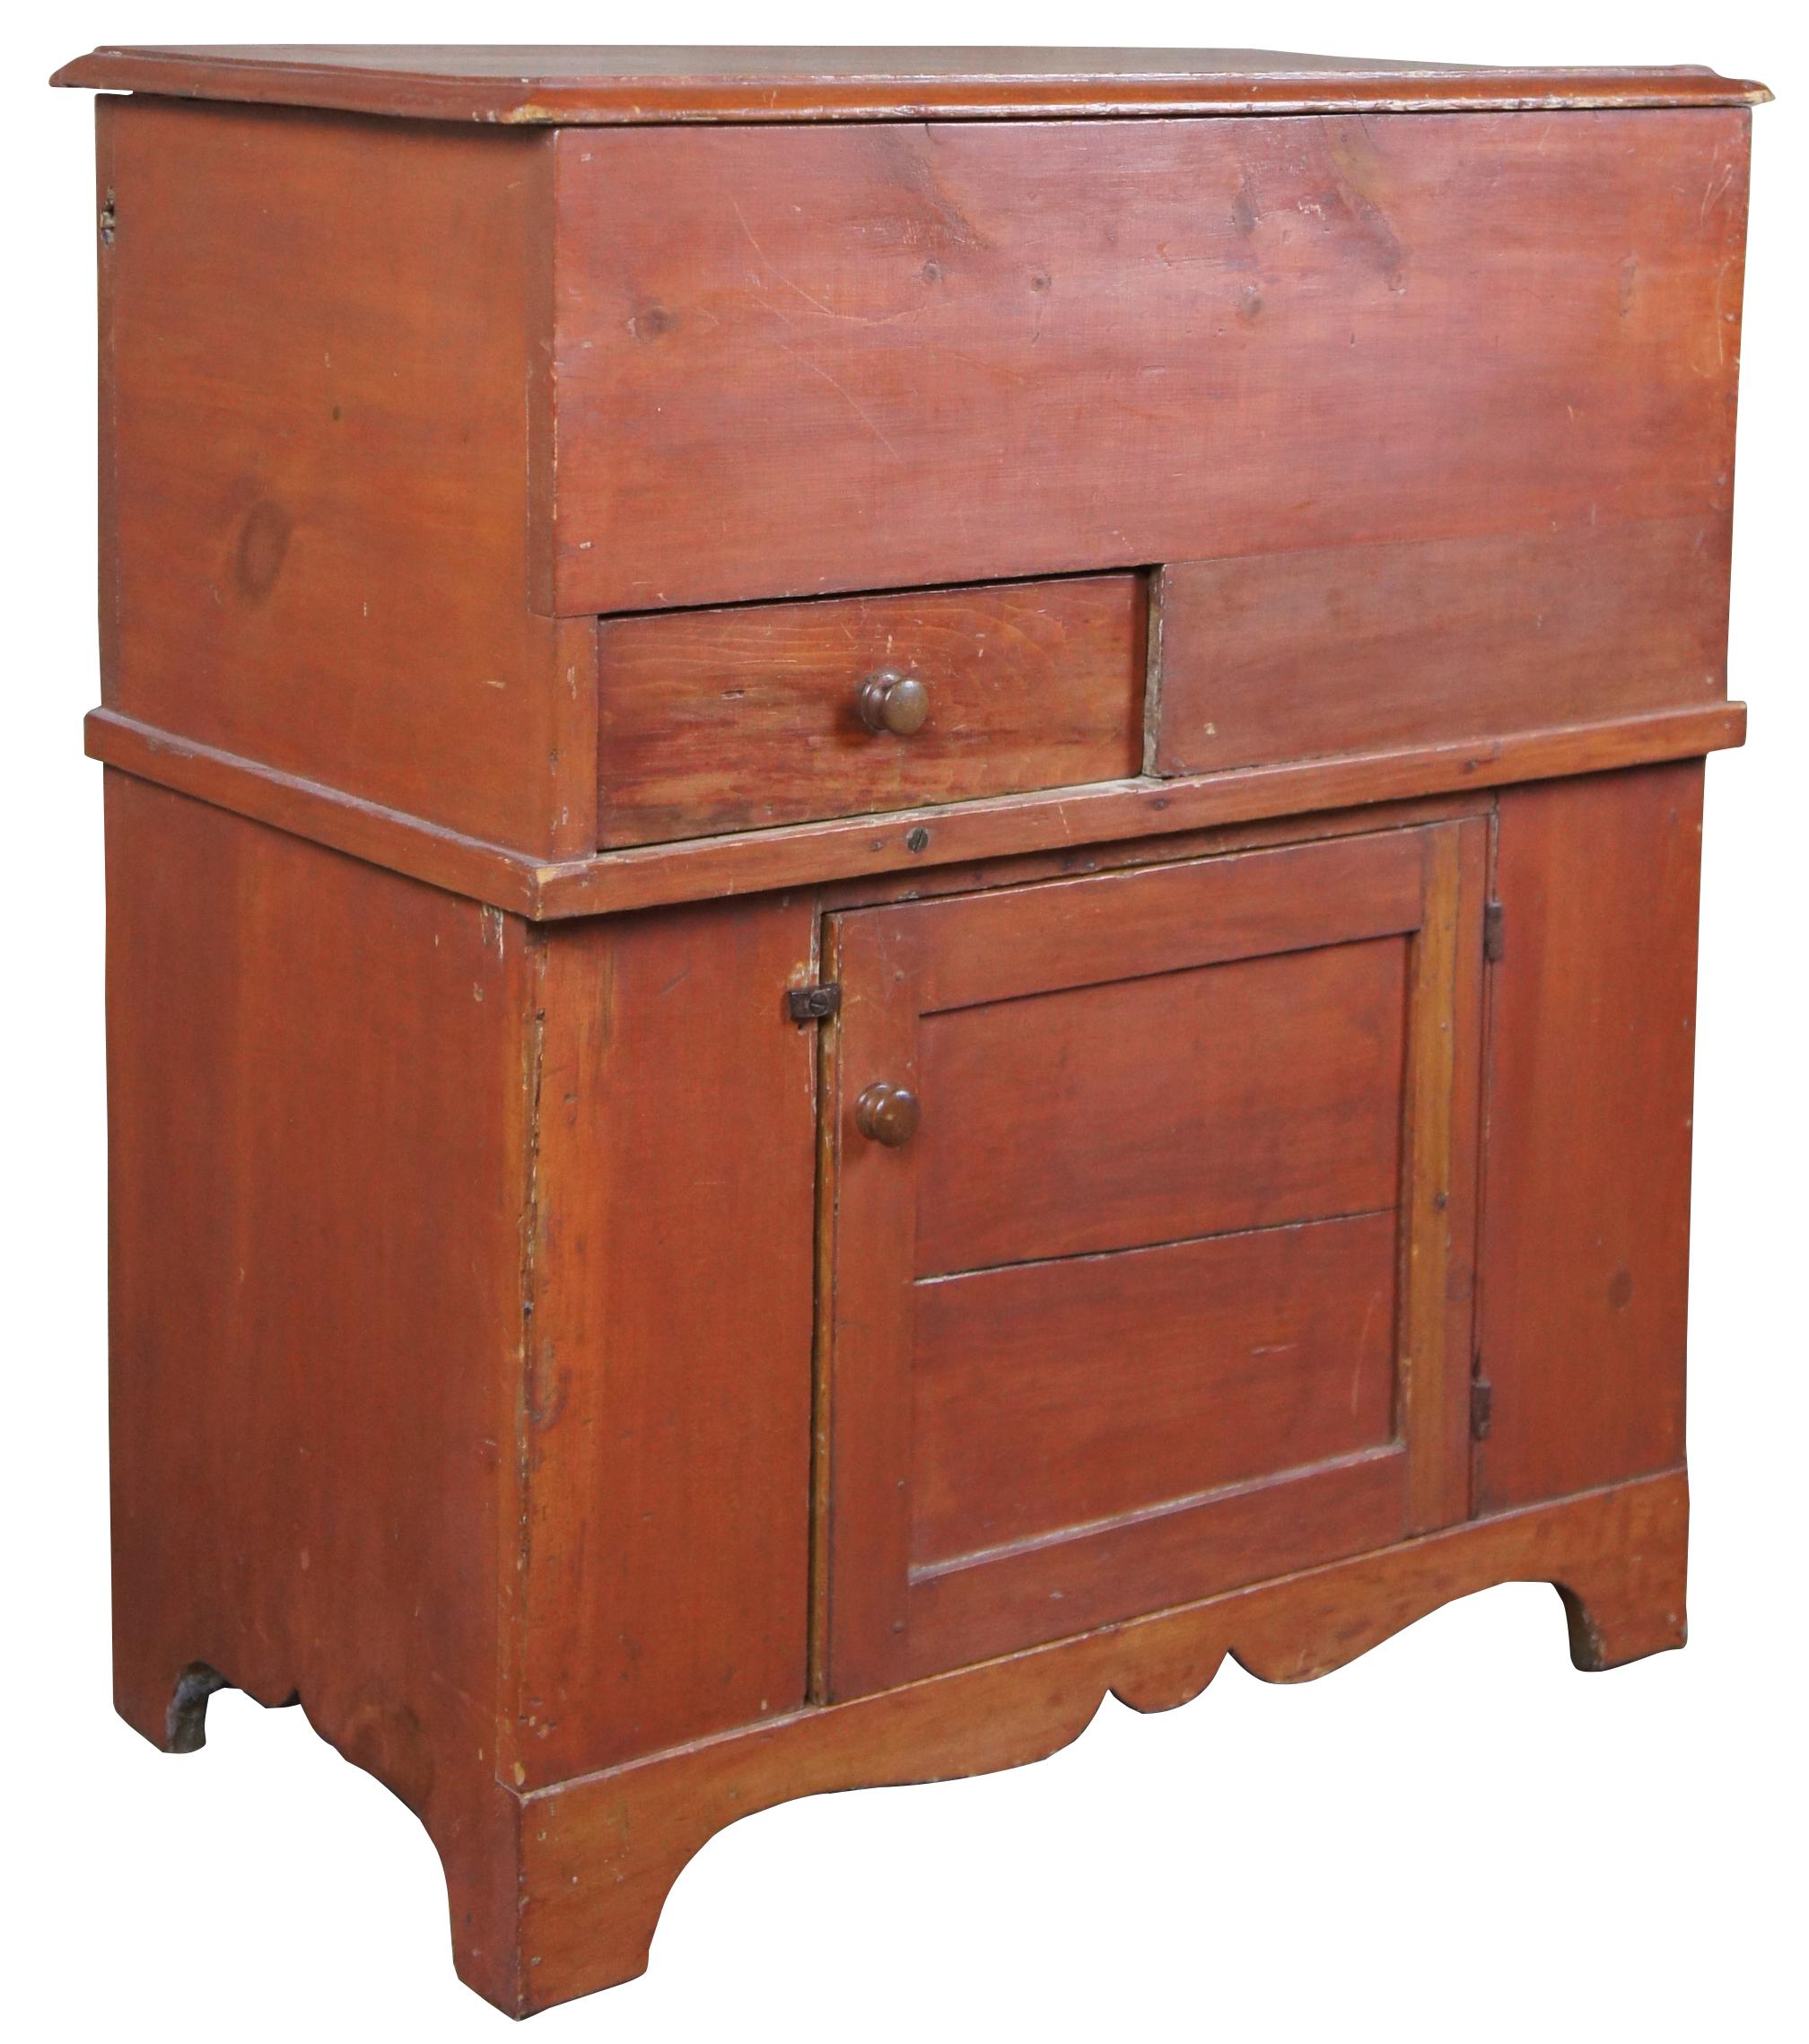 19th century Pennsylvania pine Primitive painted Lift top commode. Includes upper compartment with built in drawer over lower cabinet and carved aprons.
  